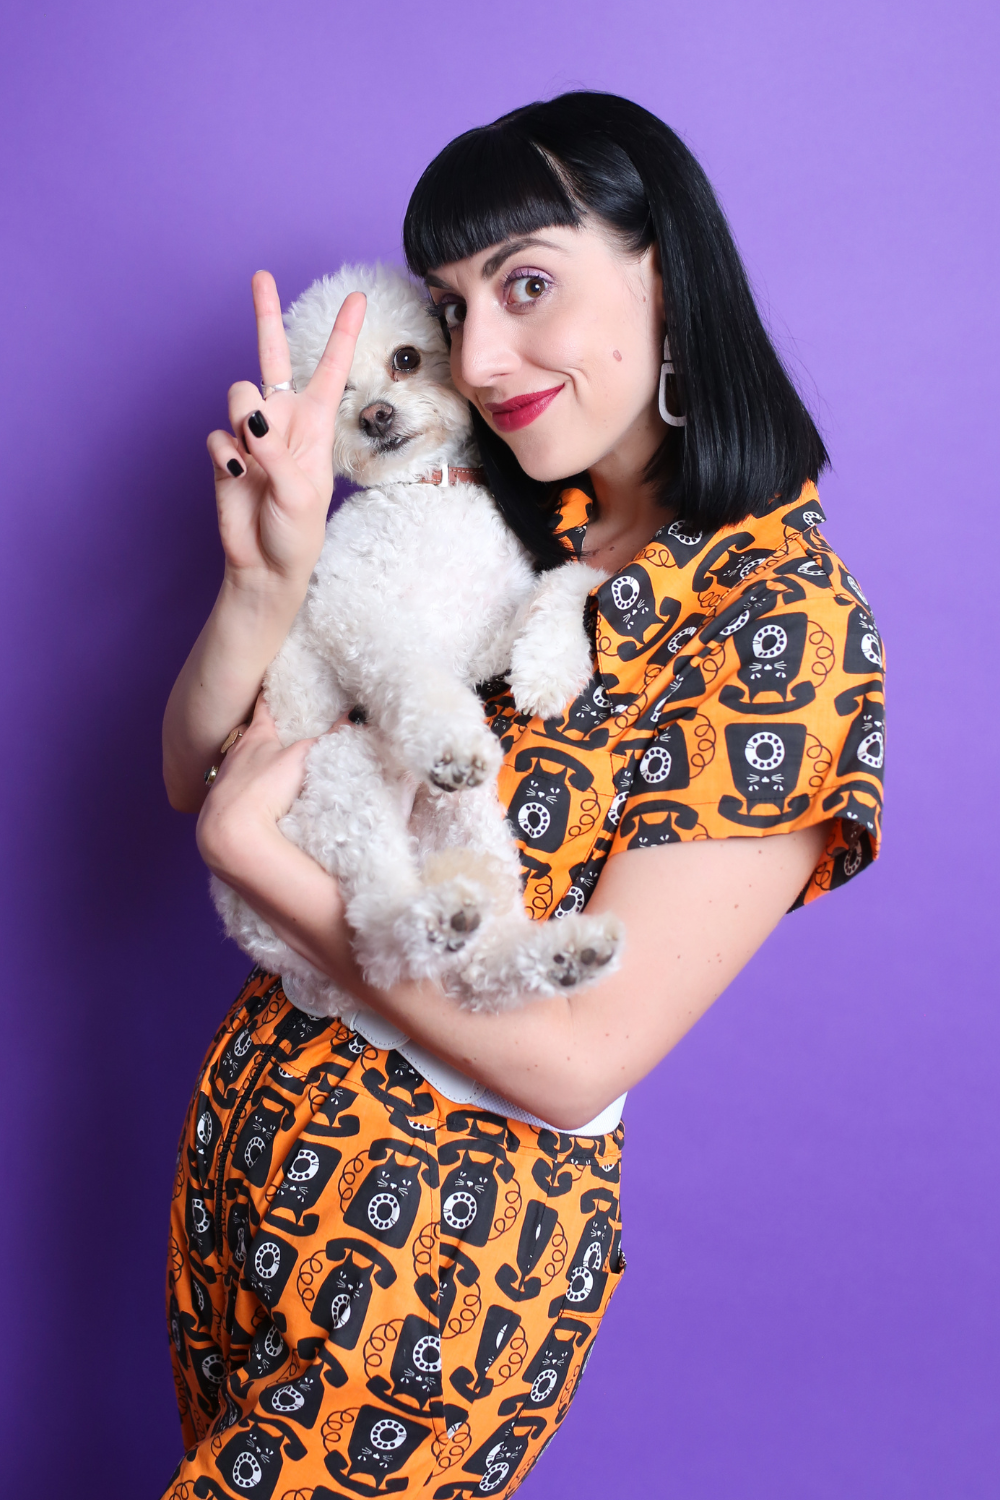 Black-haired model in orange and black cat phone print jumpsuit with white accessories and a small white dog